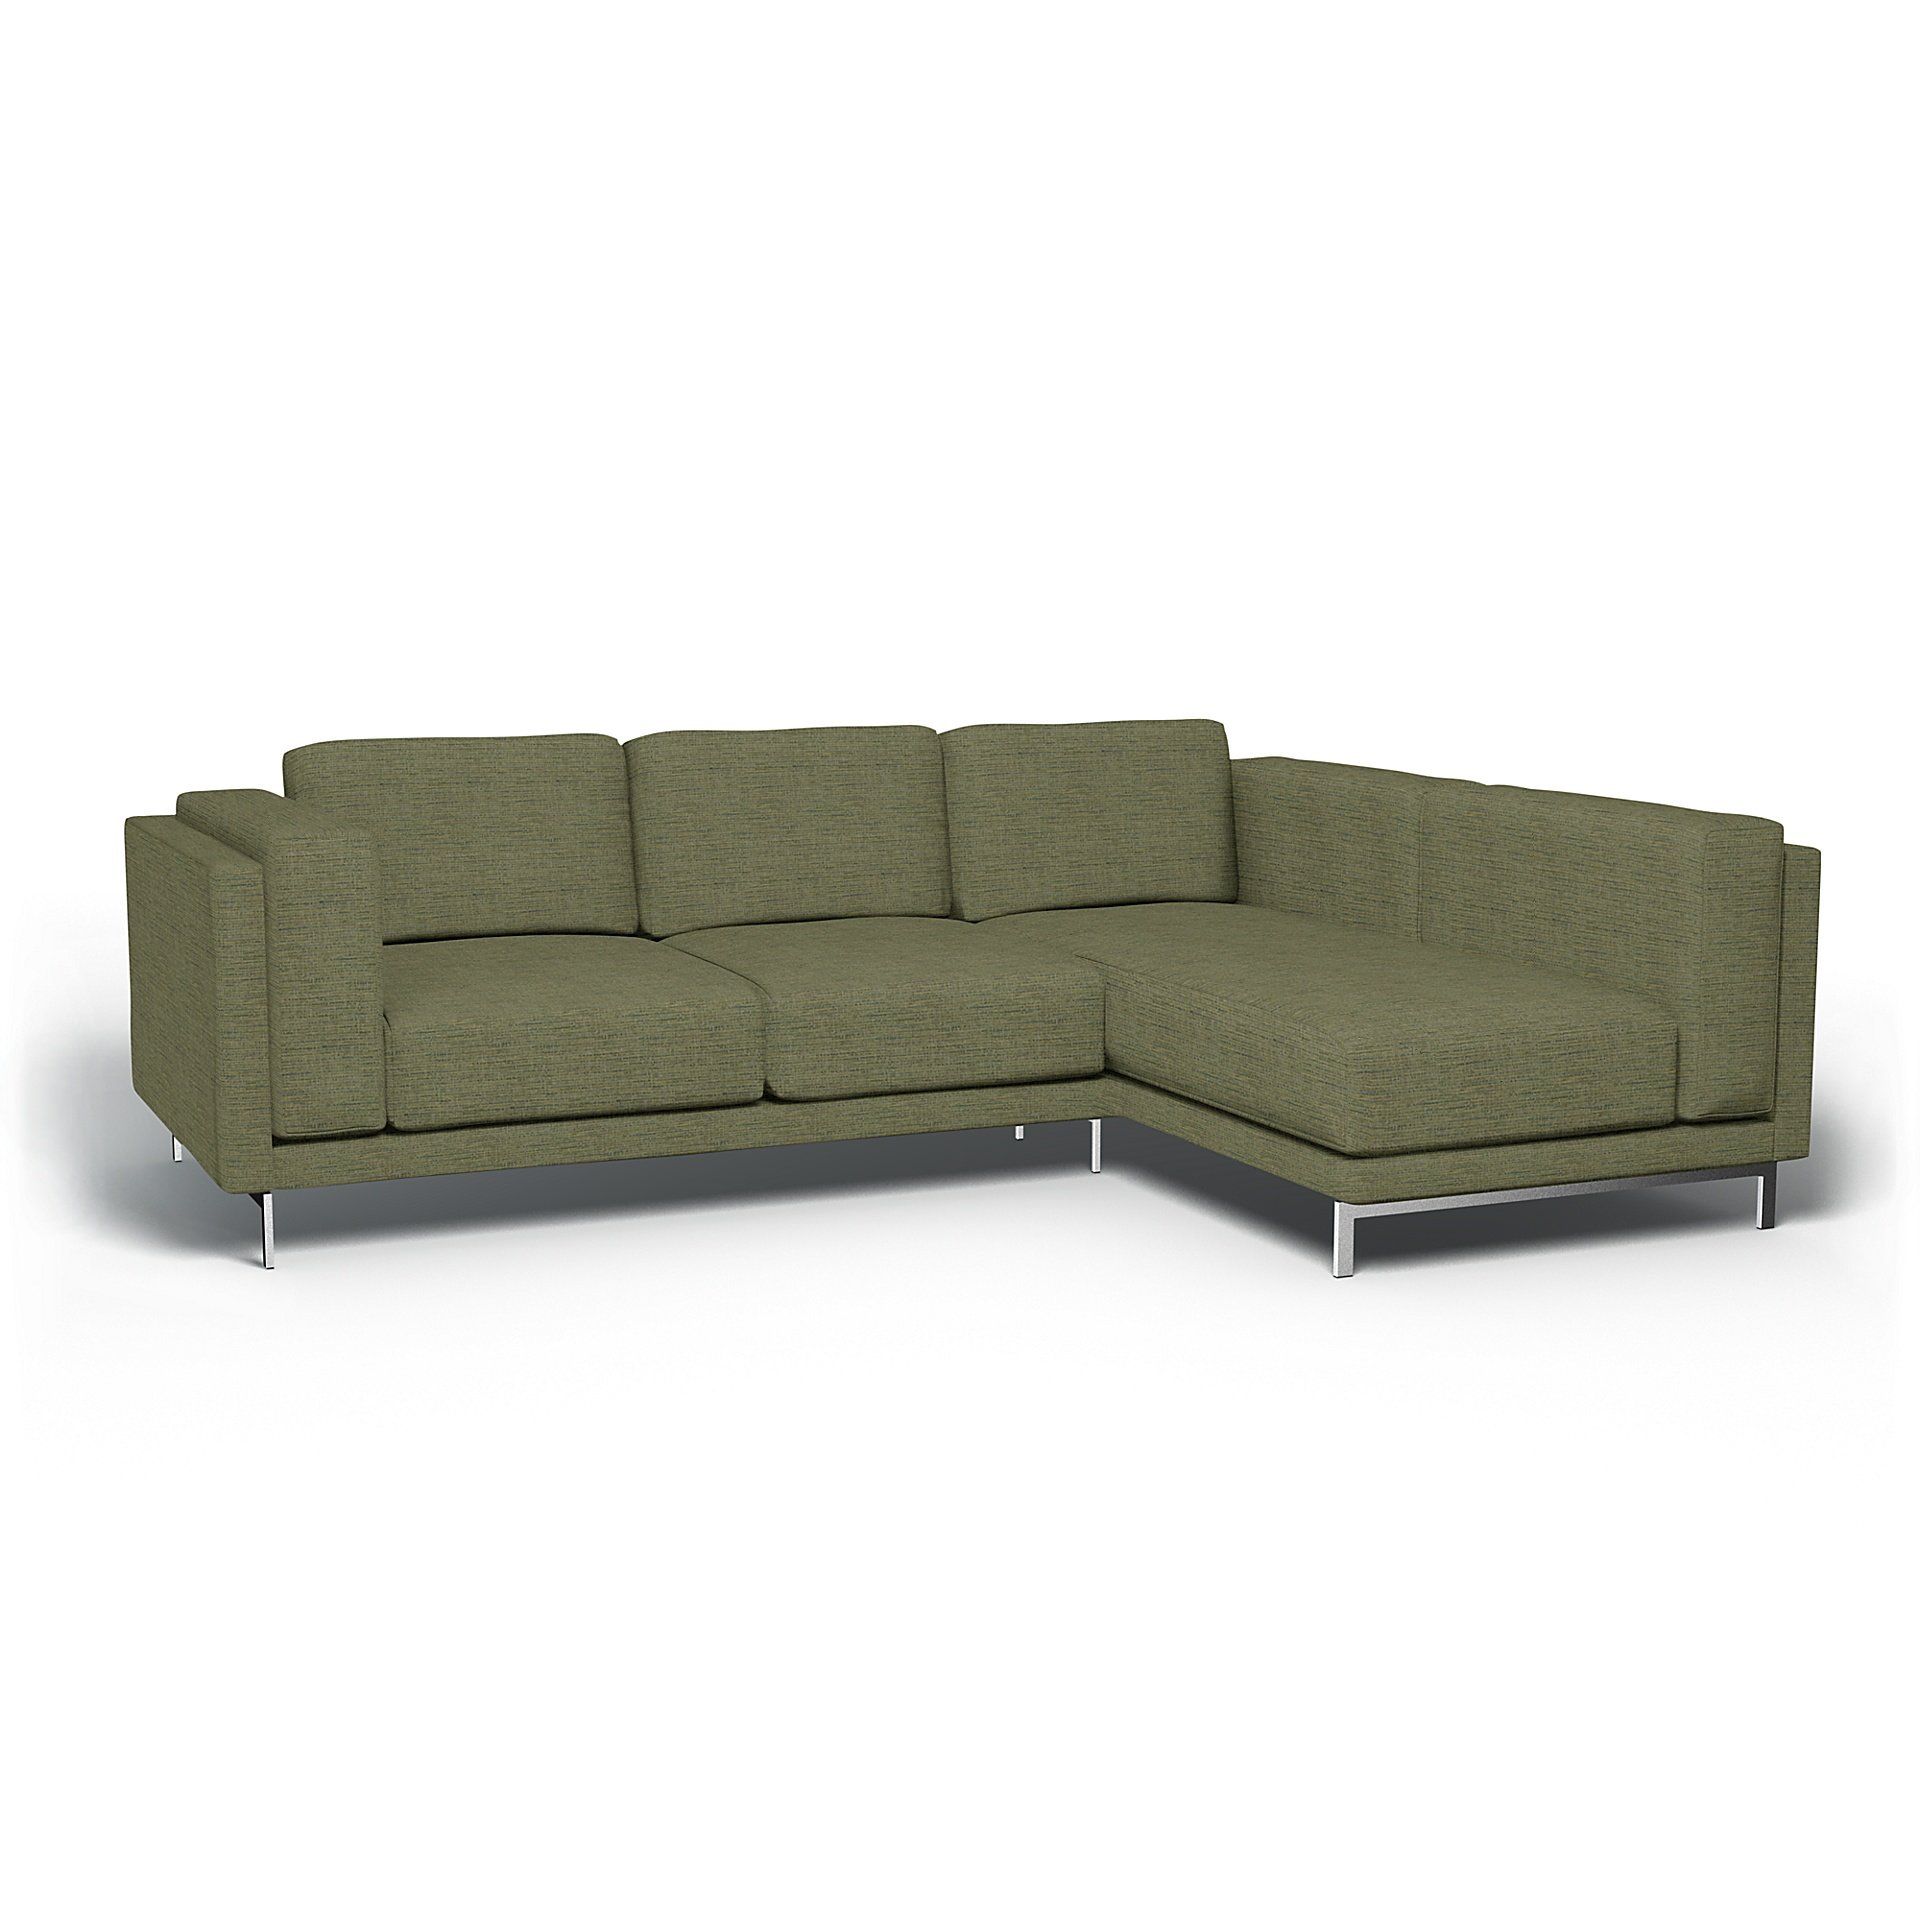 IKEA - Nockeby 3 Seat Sofa with Right Chaise Cover, Meadow Green, Boucle & Texture - Bemz